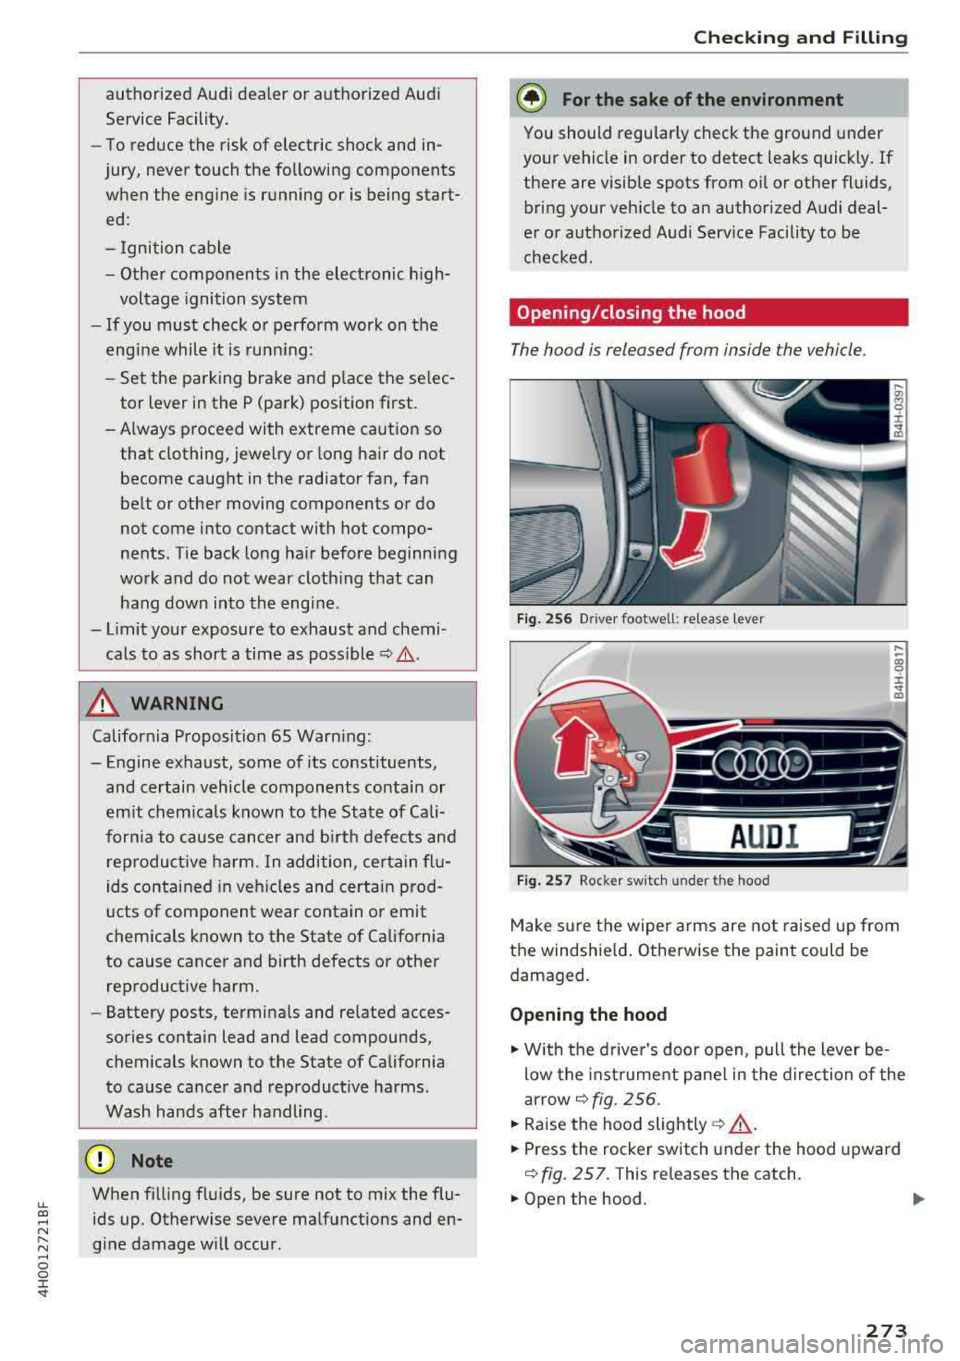 AUDI A8 2018  Owners Manual lL t:0 .... 
" ...... 
" .... 0 0 :c <I 
authorized Audi  dealer  or autho rized  Audi 
Service  Facility. 
- To reduce  the  risk of  electric  shock  and  in­
jury,  never  touch  the  followin